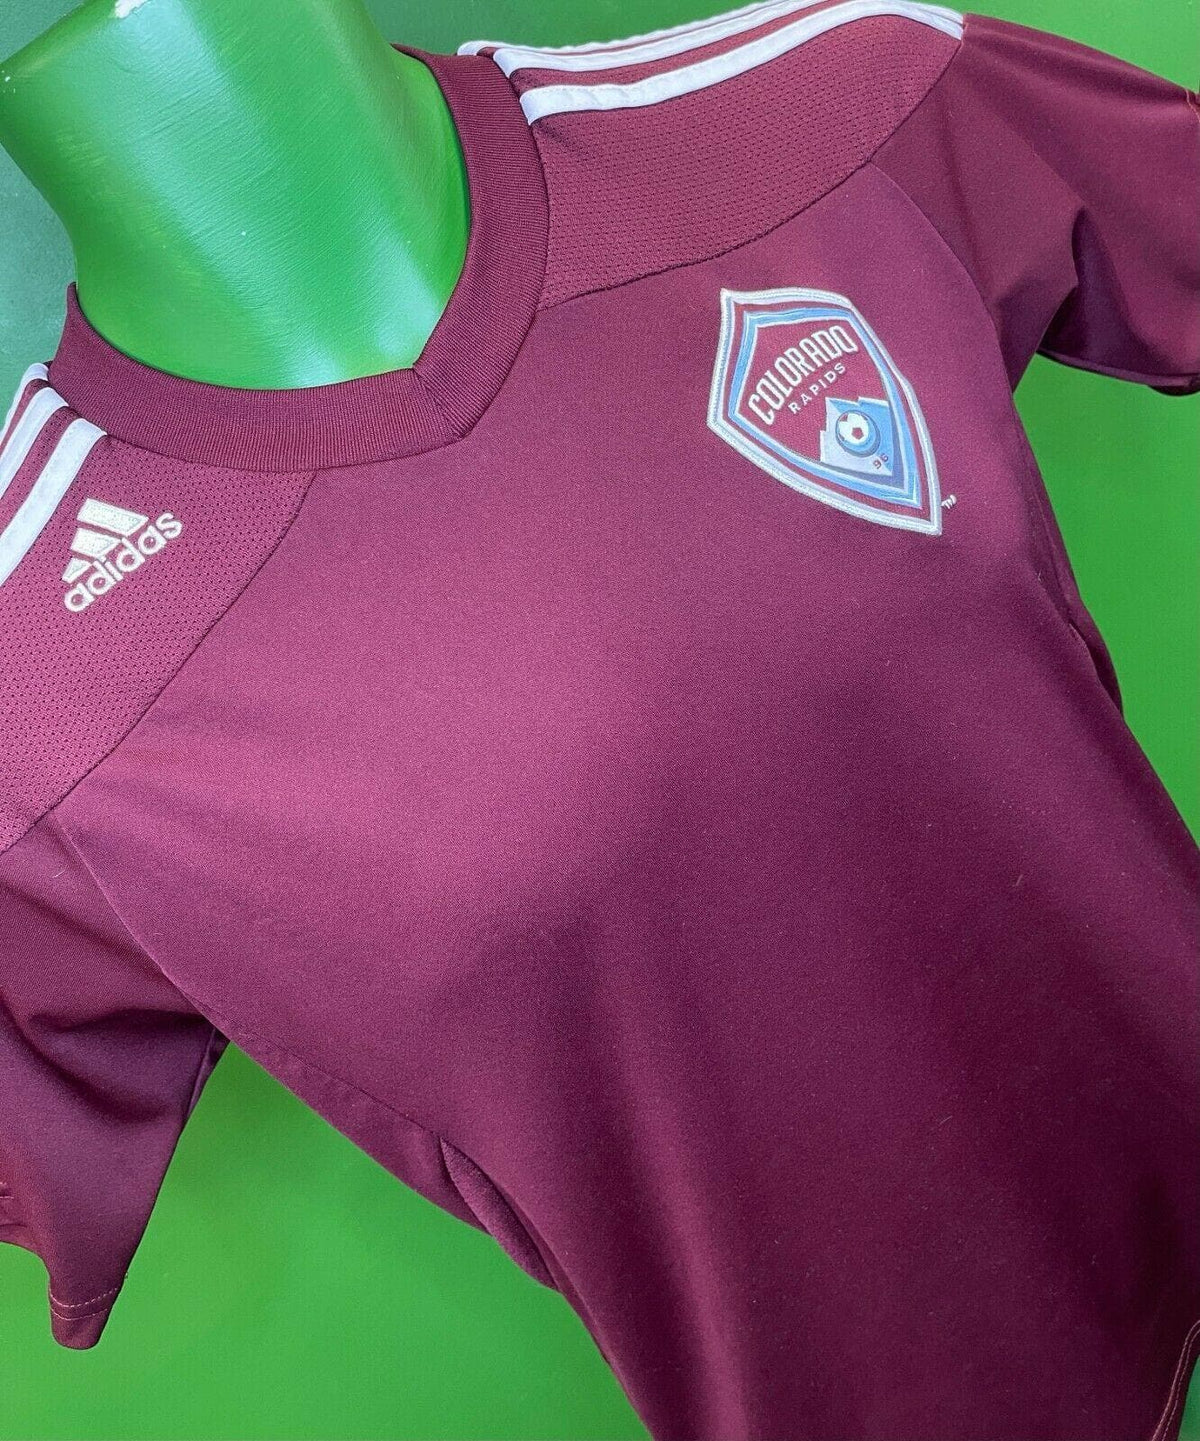 MLS Colorado Rapids Adidas Jersey Stitched Youth Small 6-8